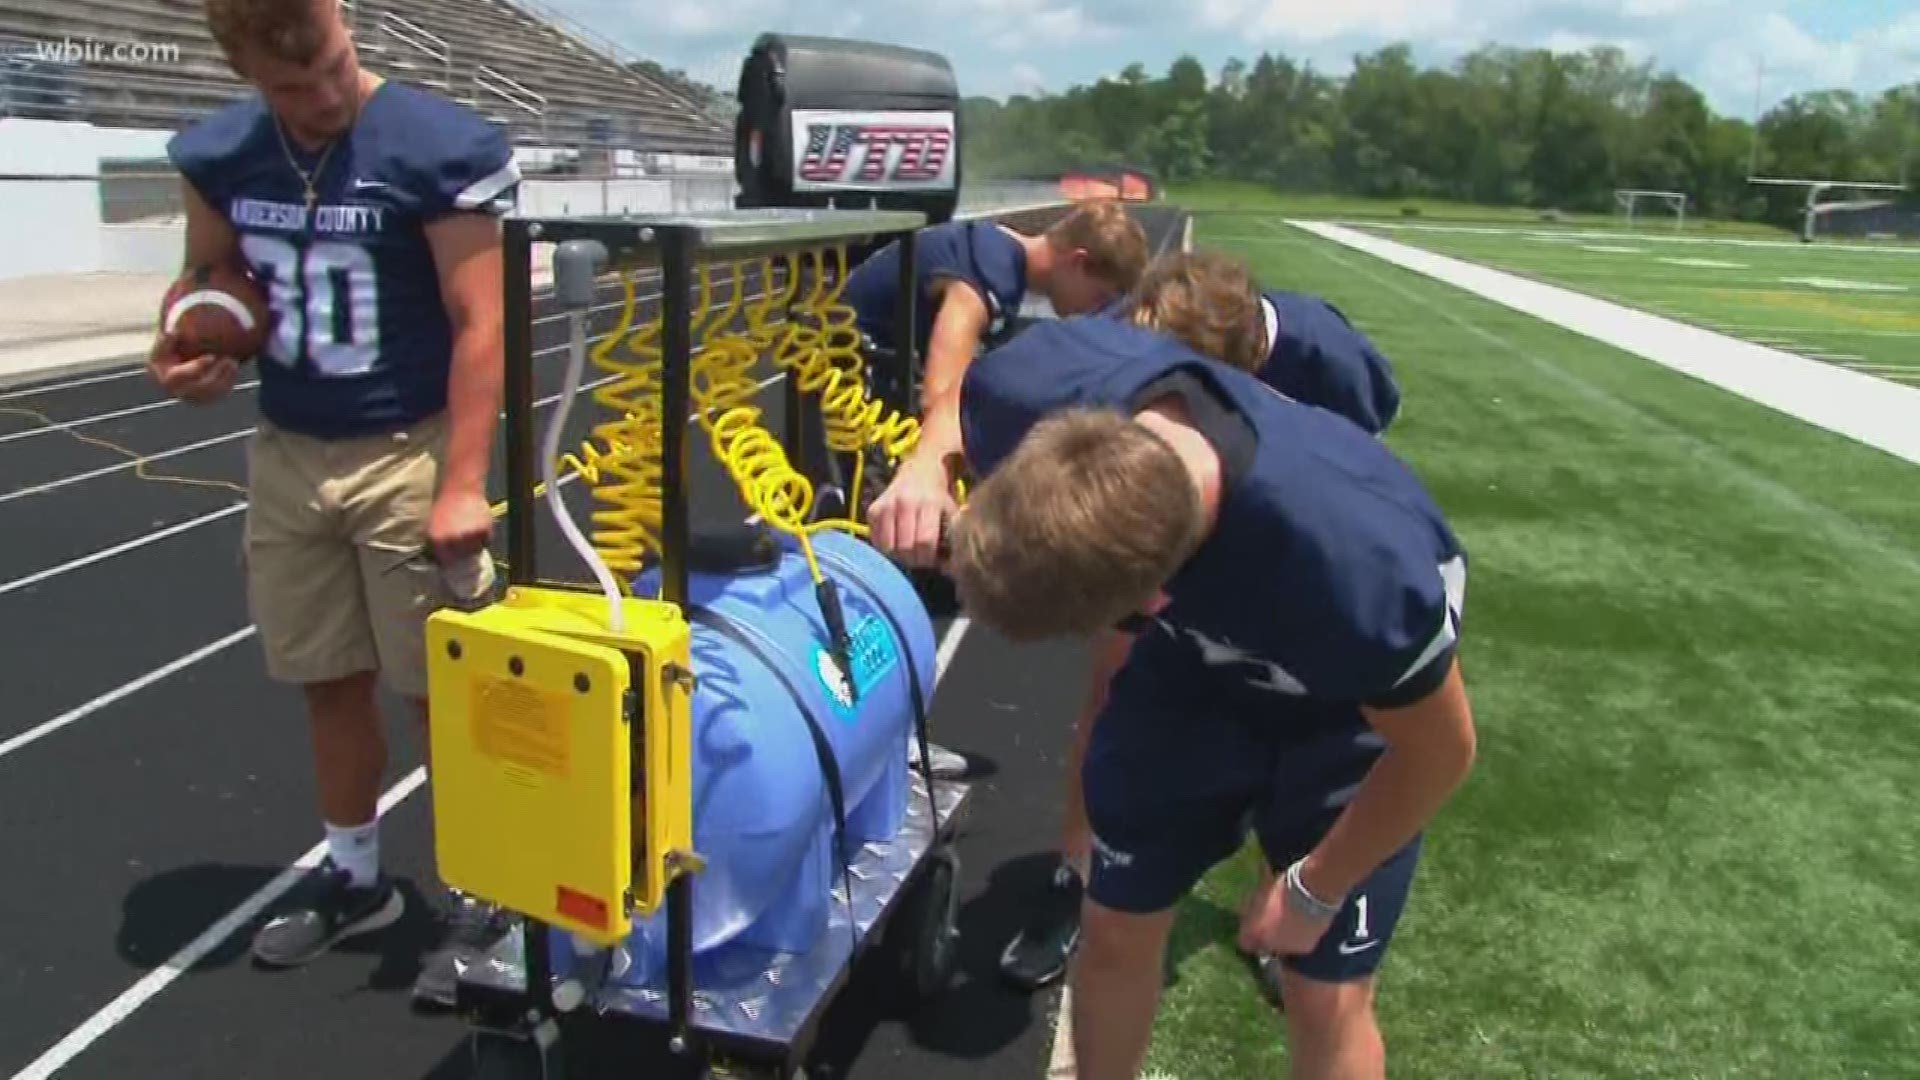 In this heat - high school football coaches are highlighting the importance of safety at summer practice.